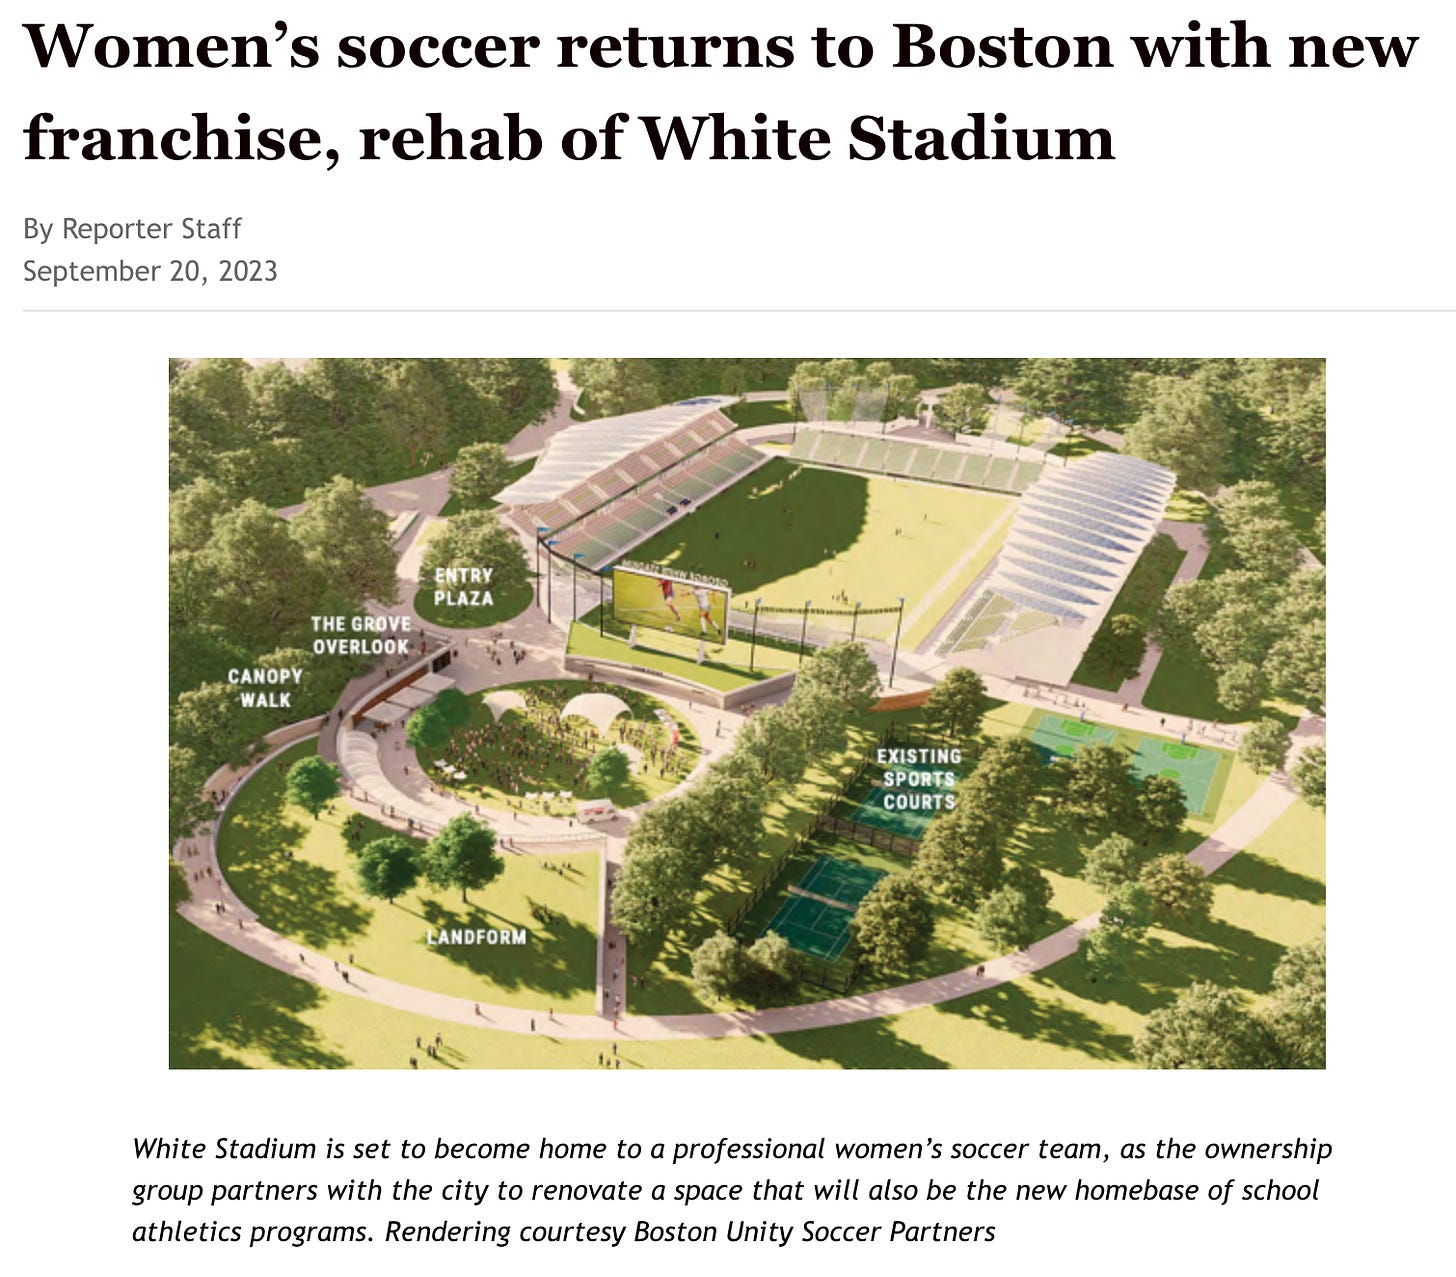 Headline reads: "Women's soccer returns to Boston with new franchise, rehab of White Stadium" and a rendering proposed for the new stadium